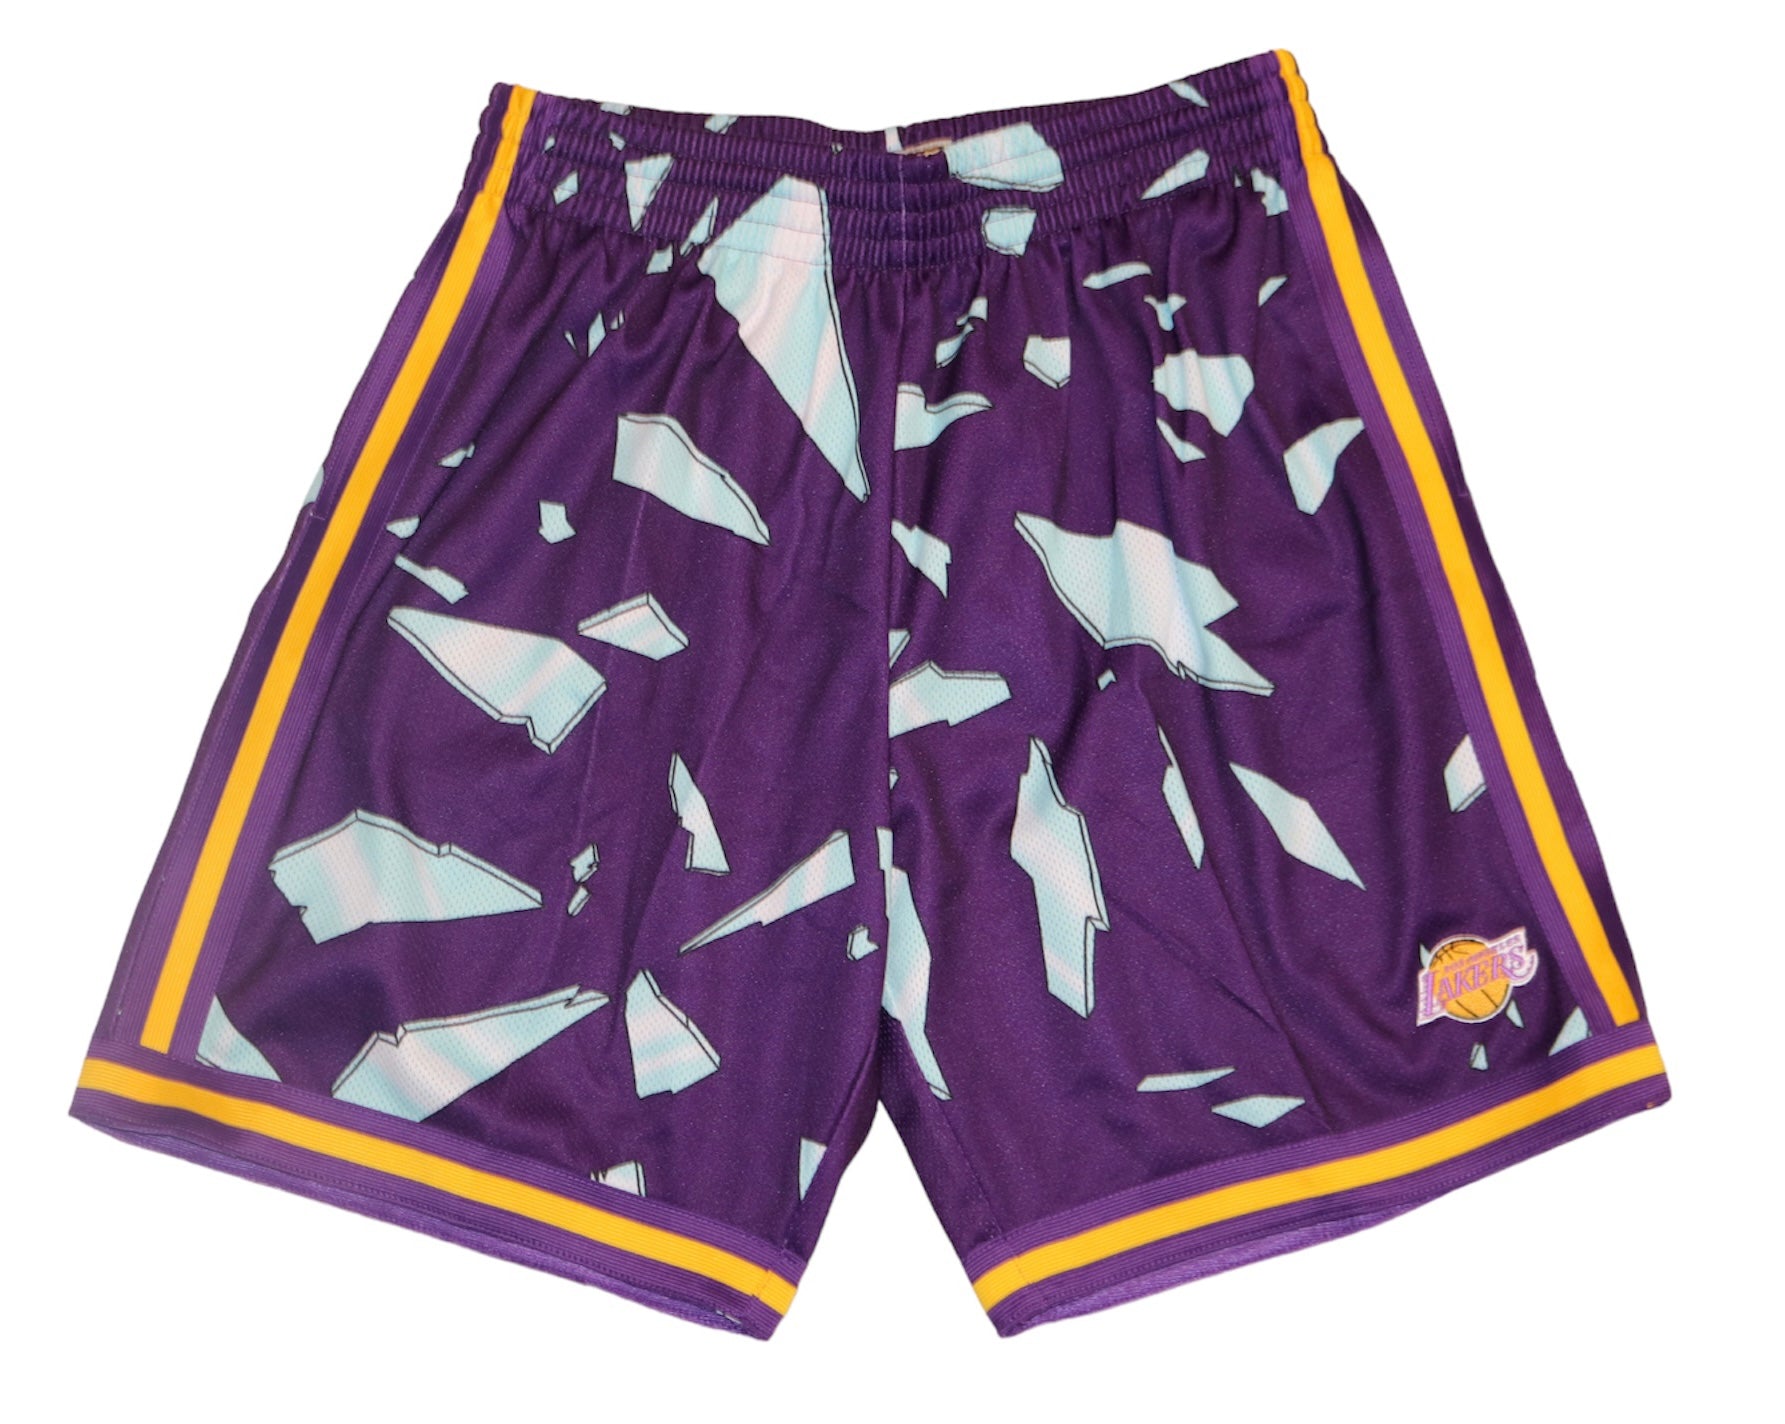 Mitchell & Ness Big Face 4.0 Fashion Shorts Los Angeles Lakers